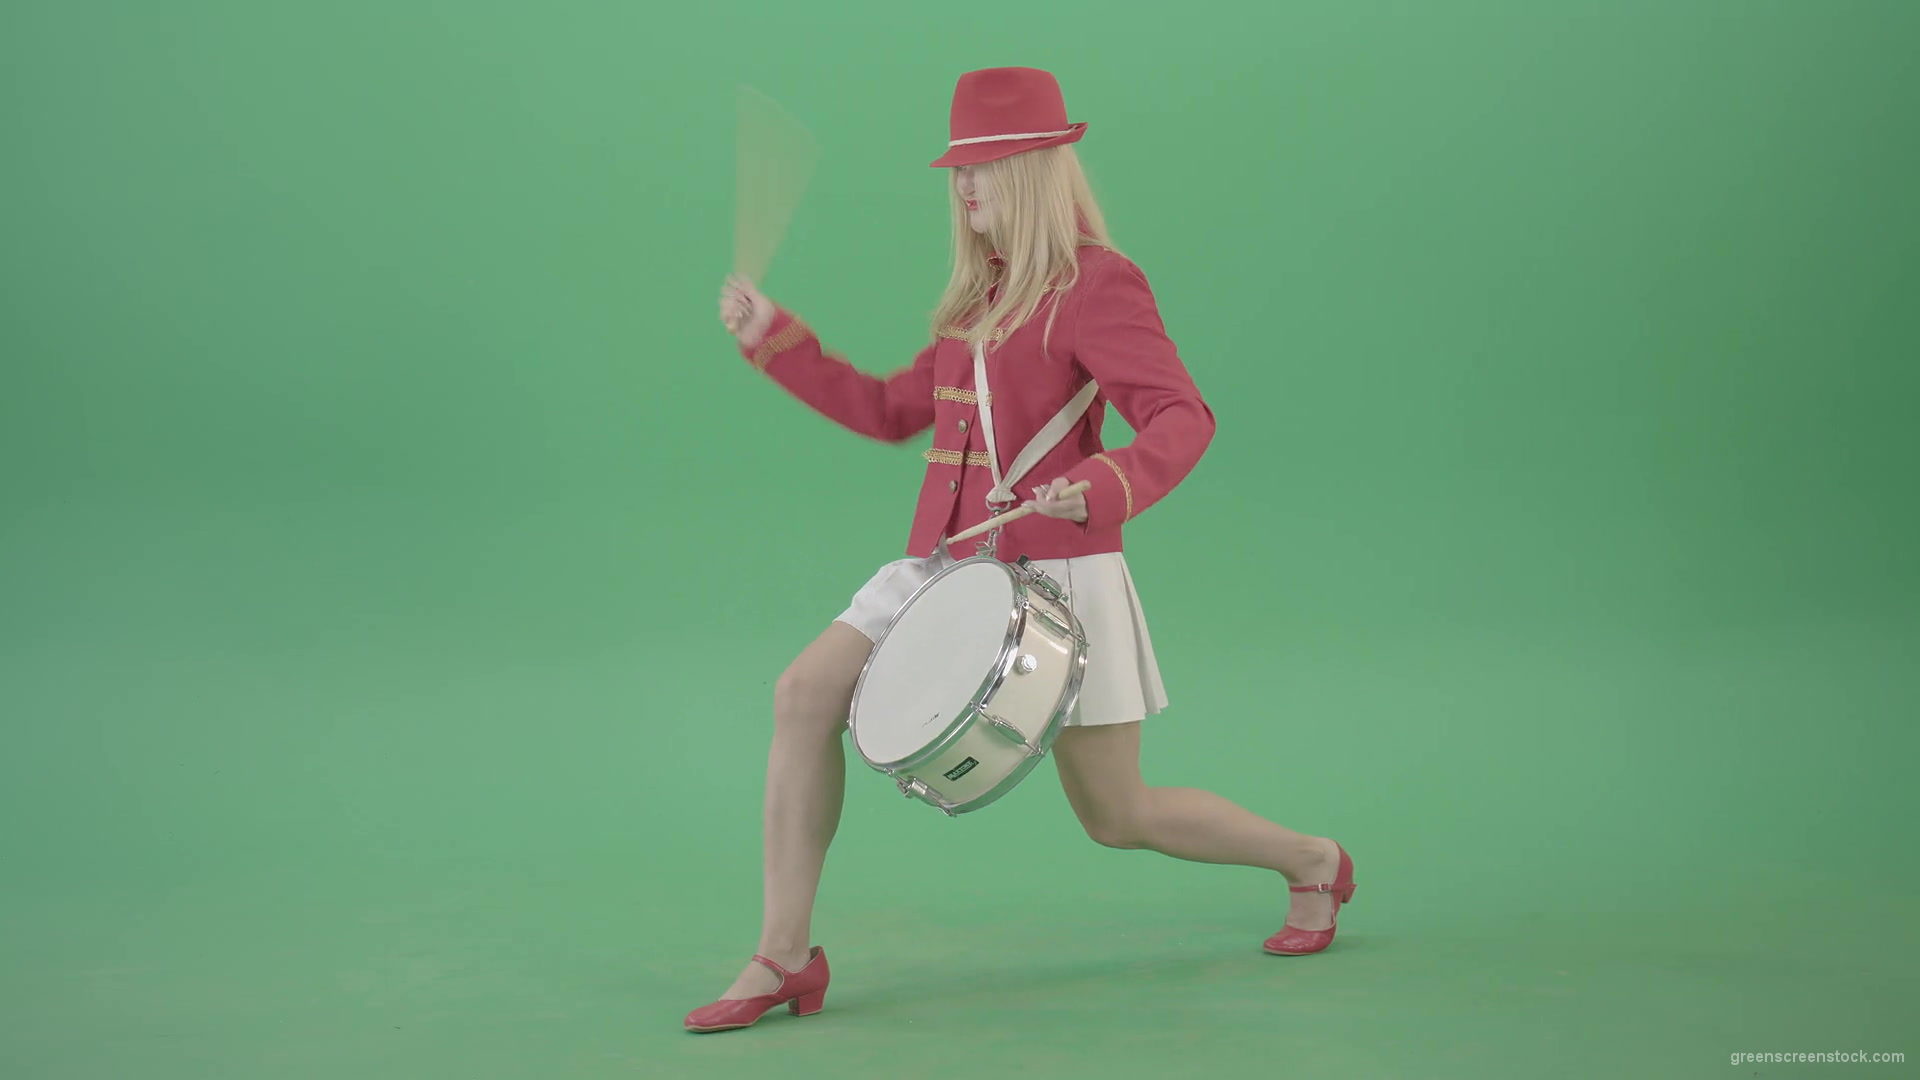 Blondie-is-ready-for-adventure-making-beats-on-snare-drum-isolated-on-Green-Screen-4K-Video-Footage-1920_007 Green Screen Stock